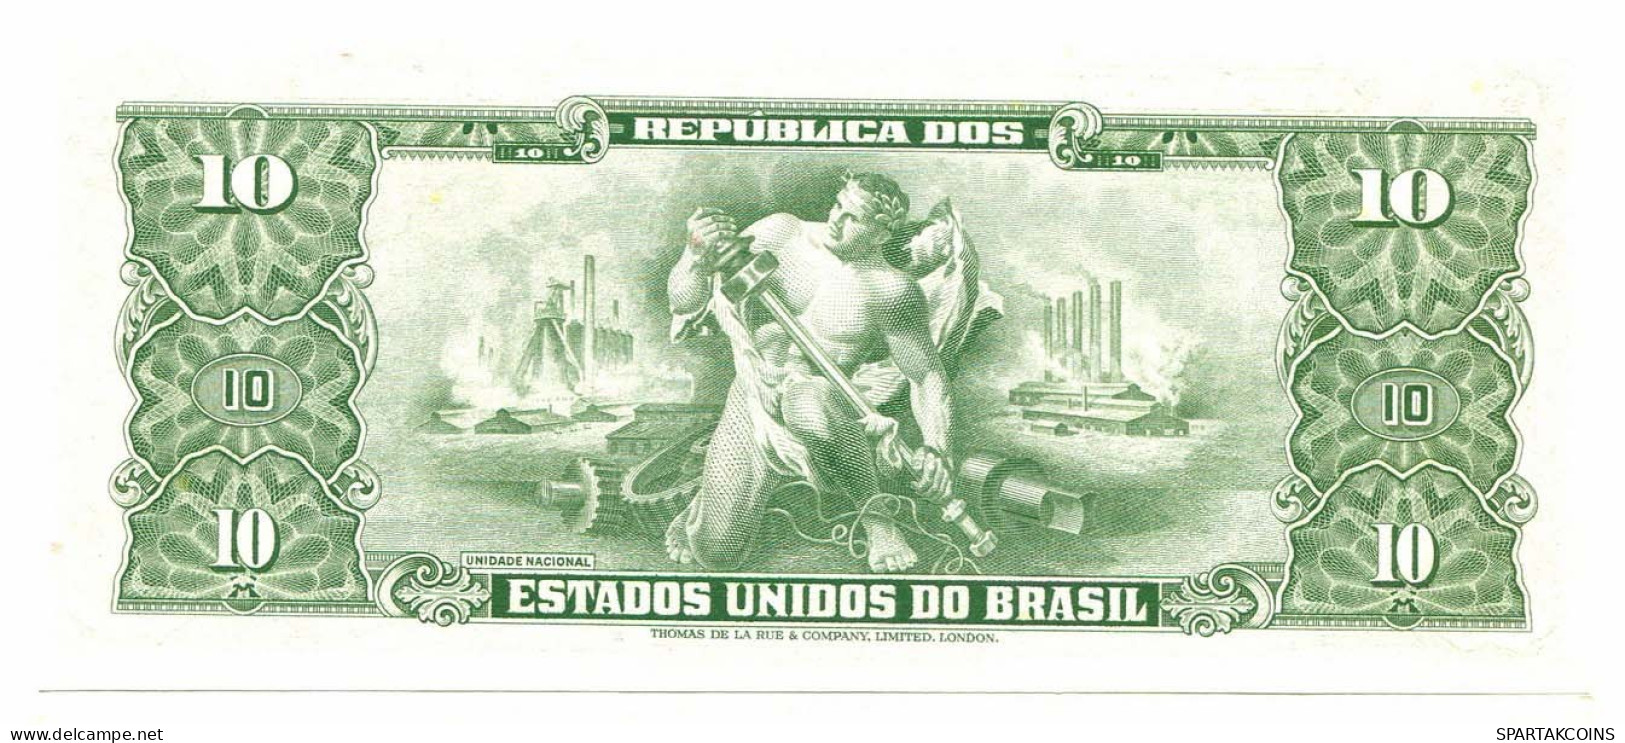 BRASIL 1 CENTAVO ON 10 CRUZEIROS 1963 SERIE3072A UNC Paper Money #P10834.4 - [11] Local Banknote Issues